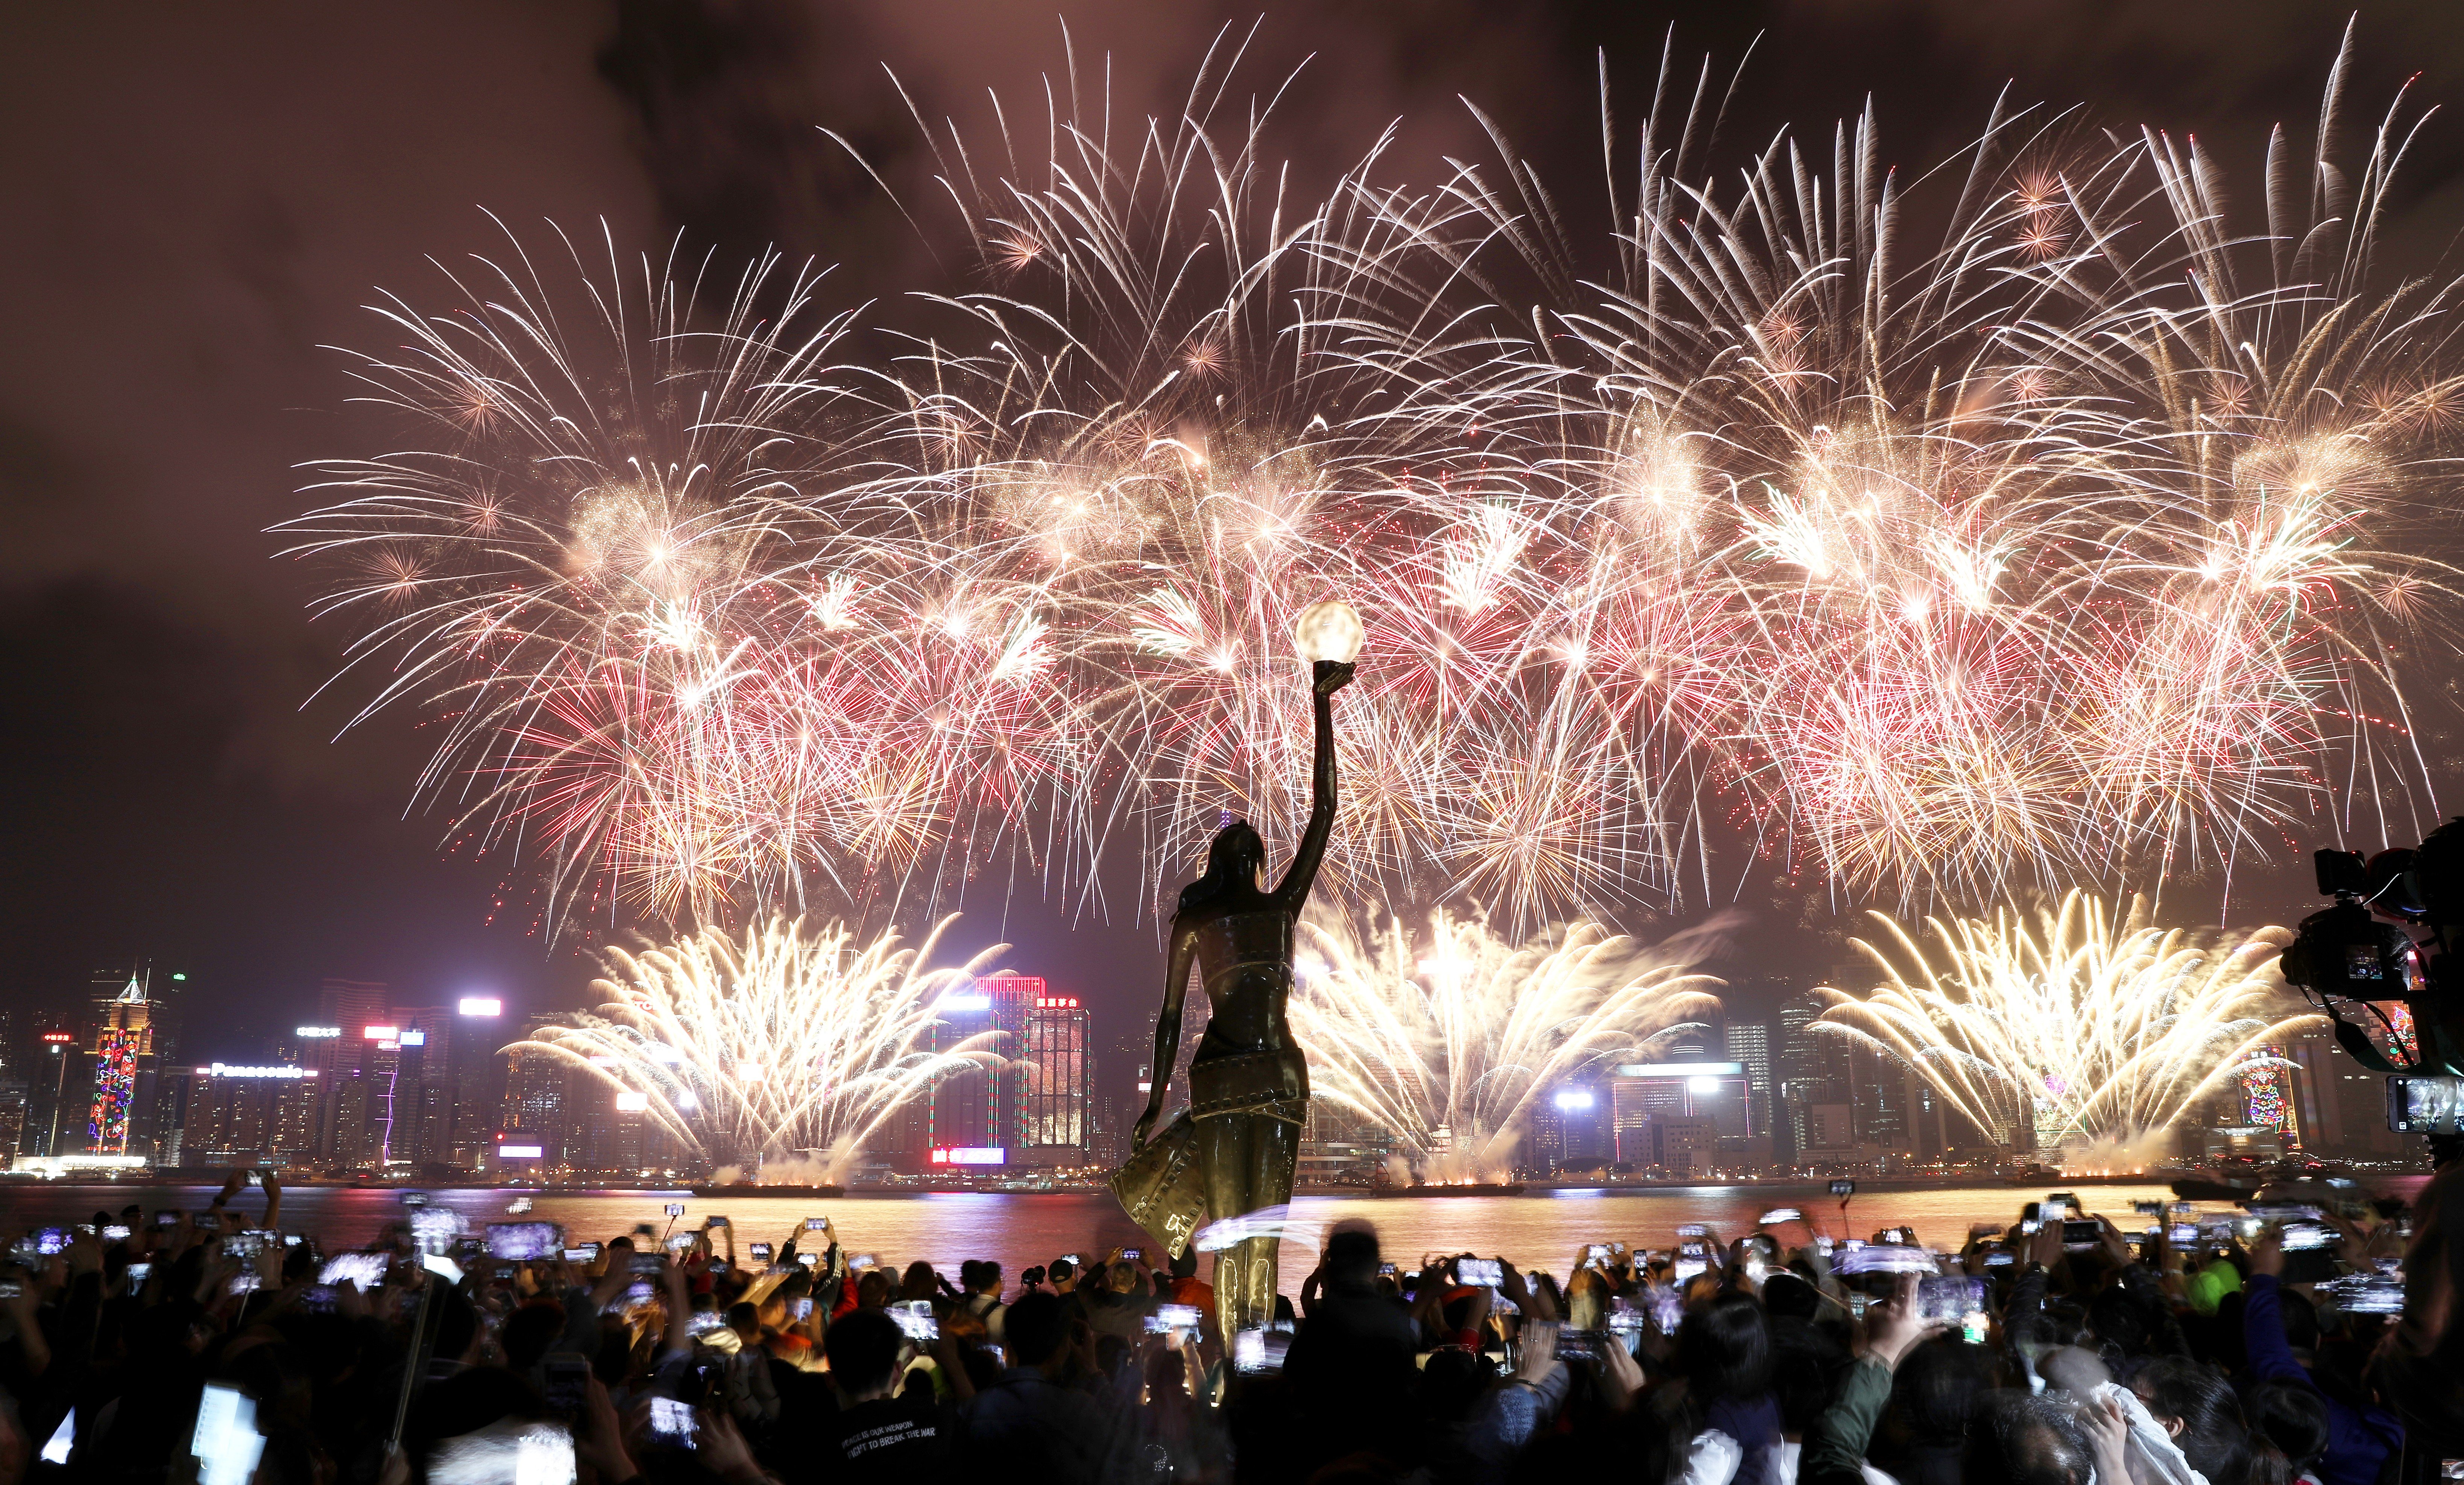 Fireworks over Victoria Harbour to celebrate the Lunar New Year – 2019 has been a year packed with action, heartbreak and highlights. Photo: Nora Tam